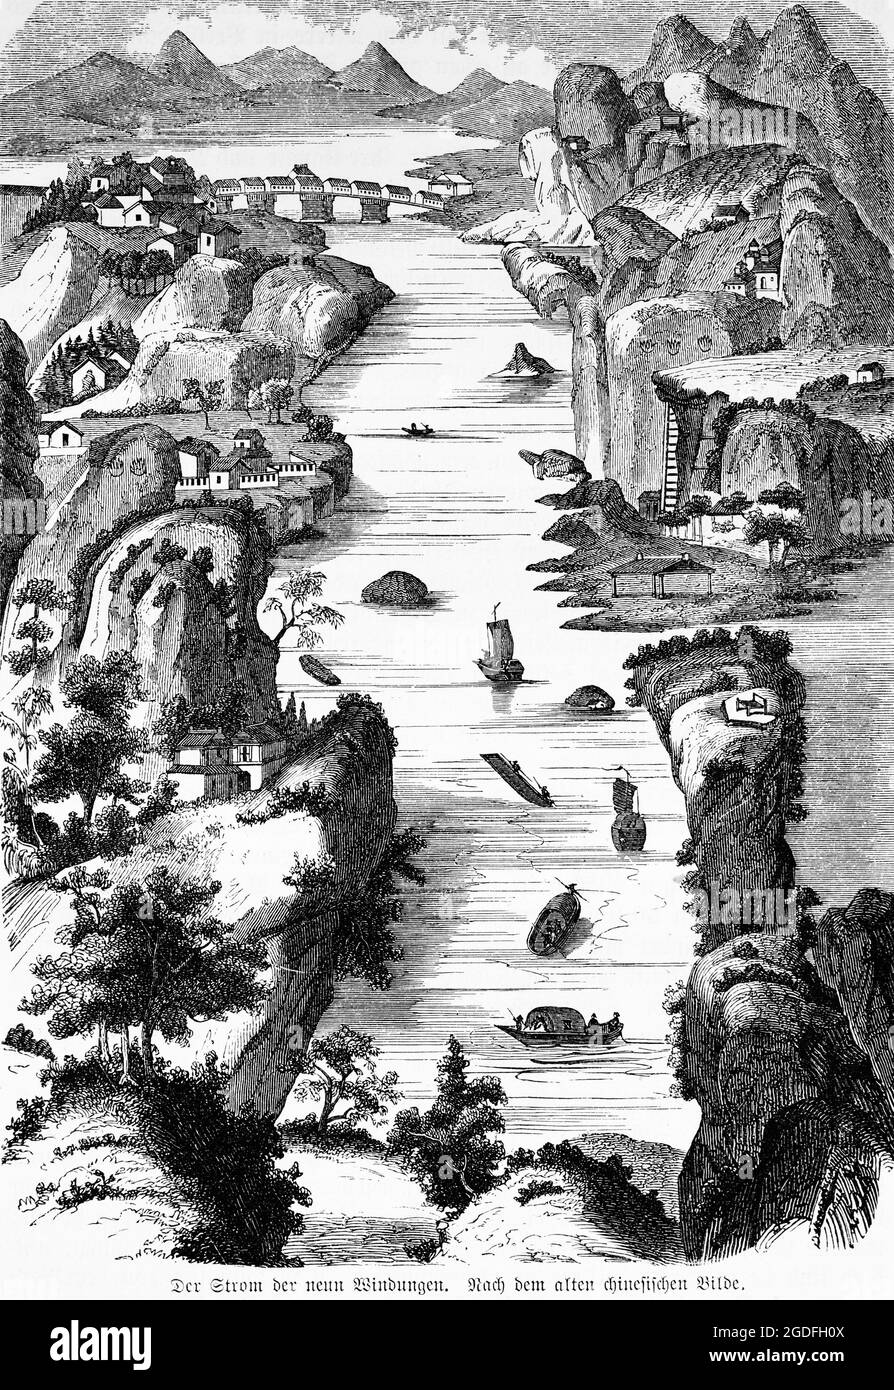 Fluss der neun Windungen or River of nine meanders, within the city of Wuhishan, China, Asia, after an ancient engraving, ihistoric illustration 1881 Stock Photo